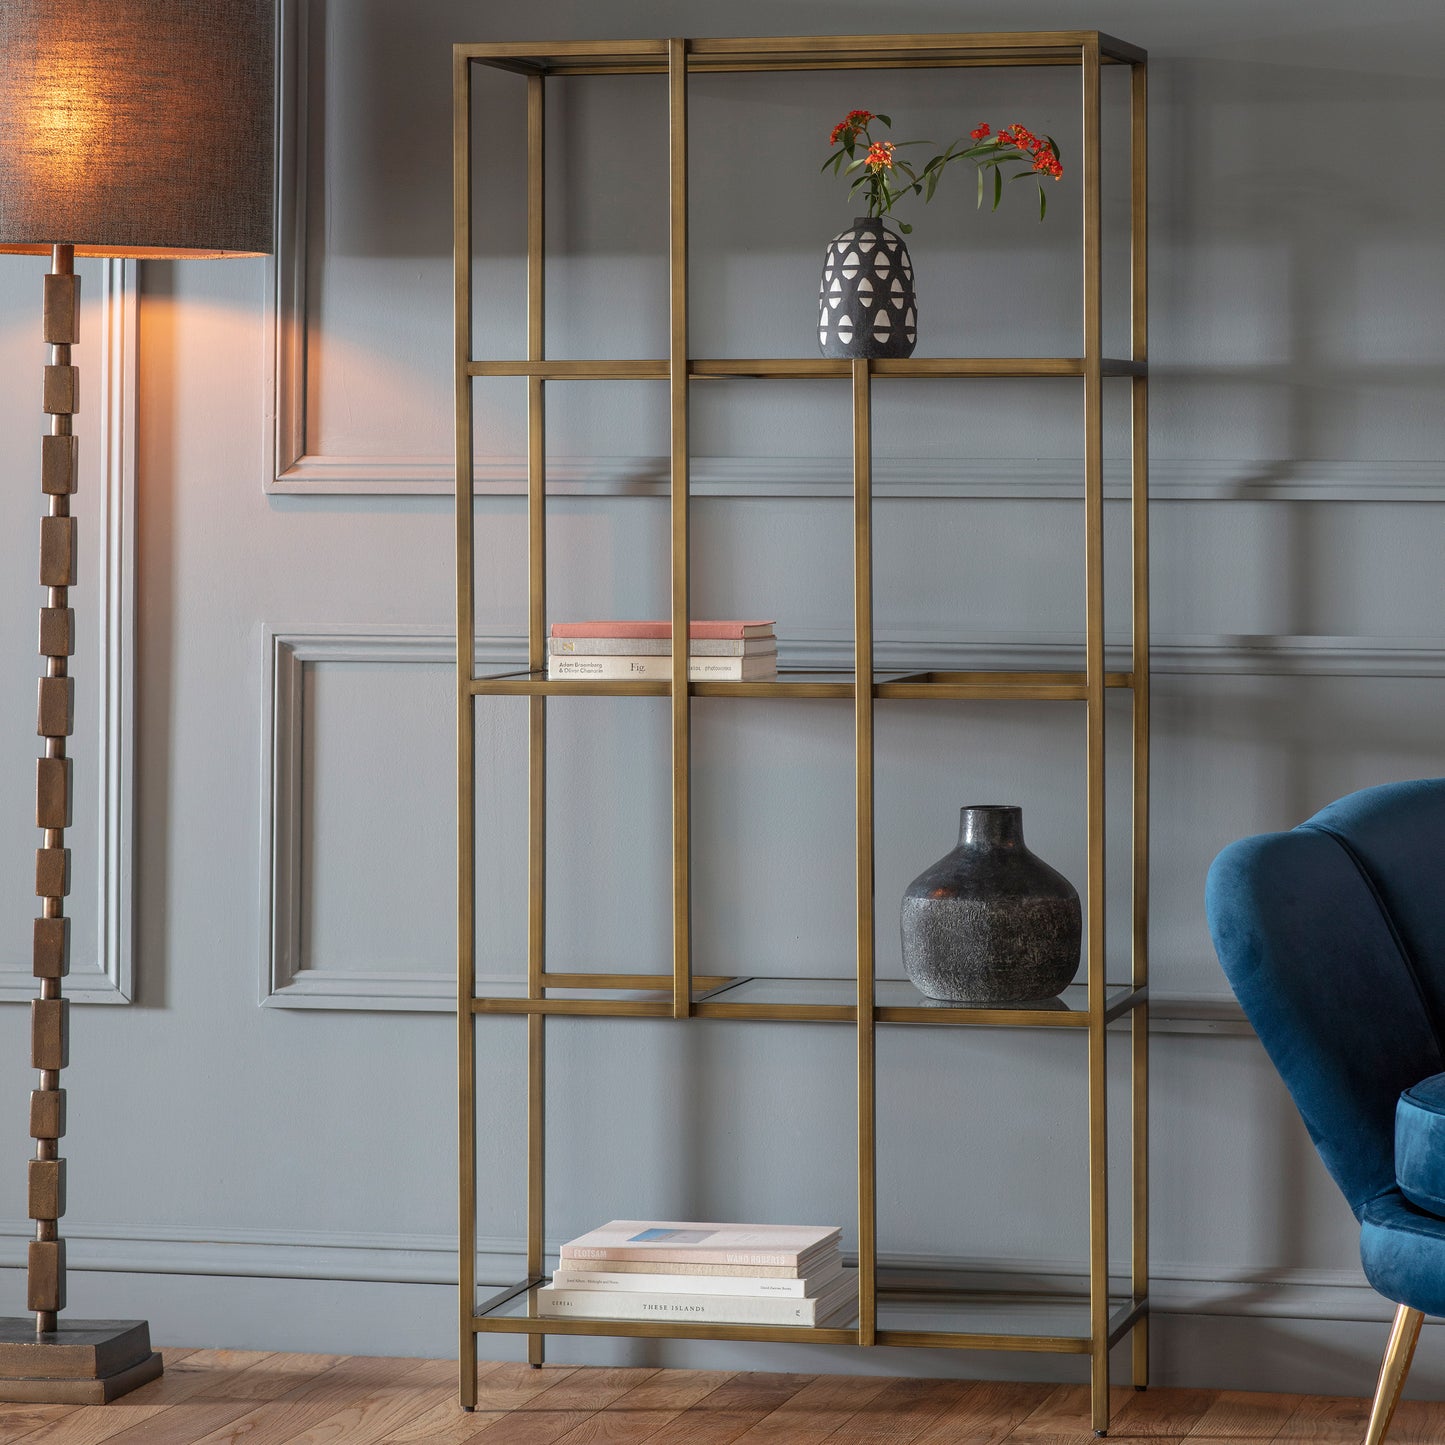 An Engleborne Display Unit Bronze 700x320x1505mm in a room with interior decor and home furniture.